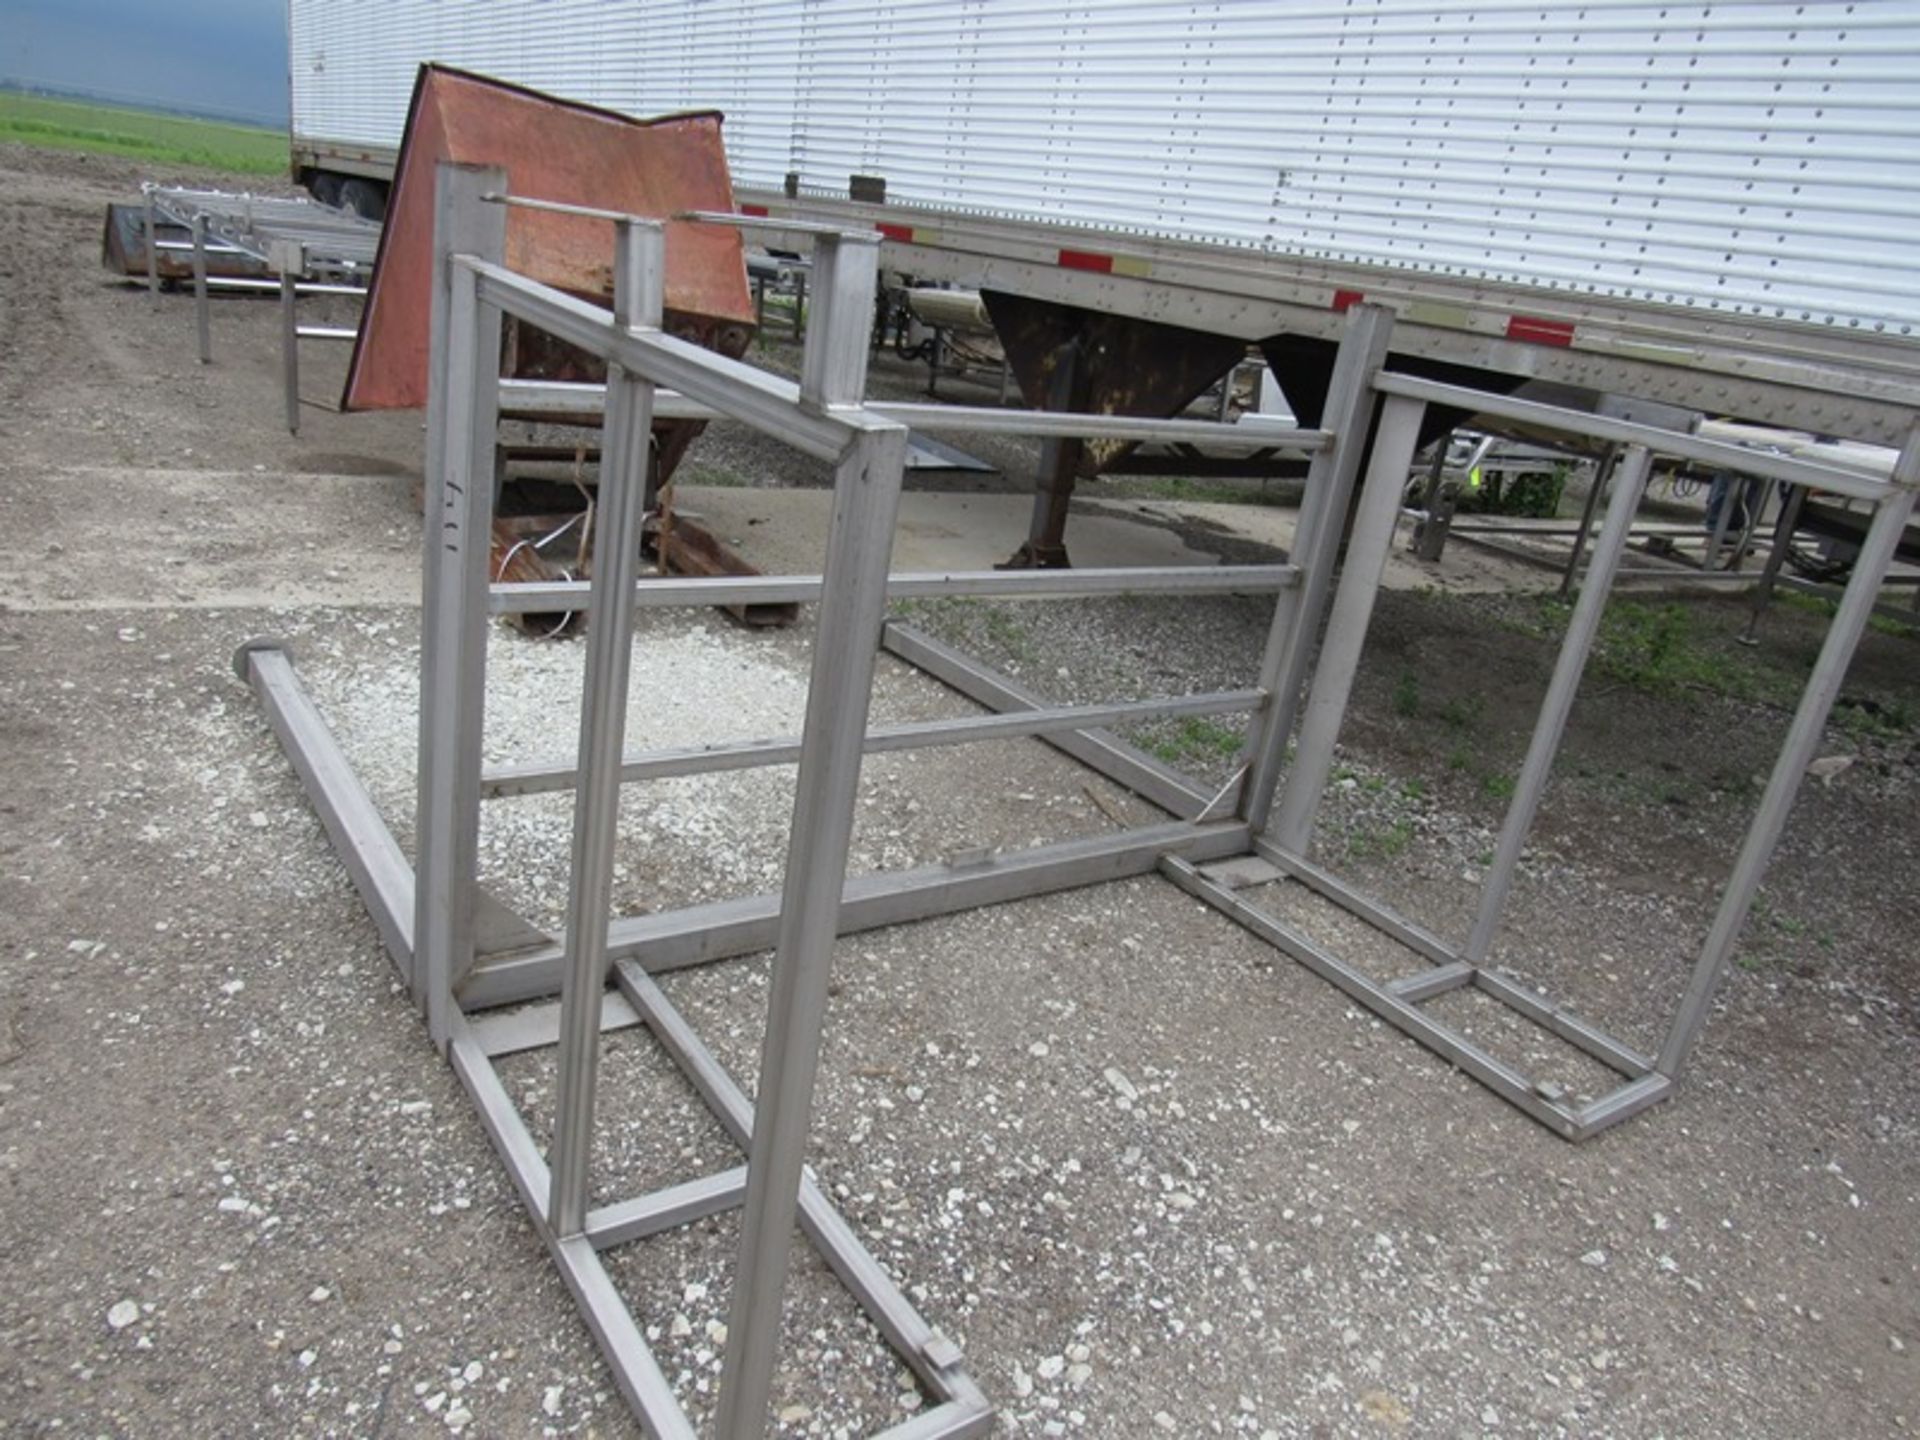 Scrap Lot, Stainless Steel Conveyor Frames, (7) pieces (Loading Fee: $250.00 - Rigger: Norm - Image 2 of 6